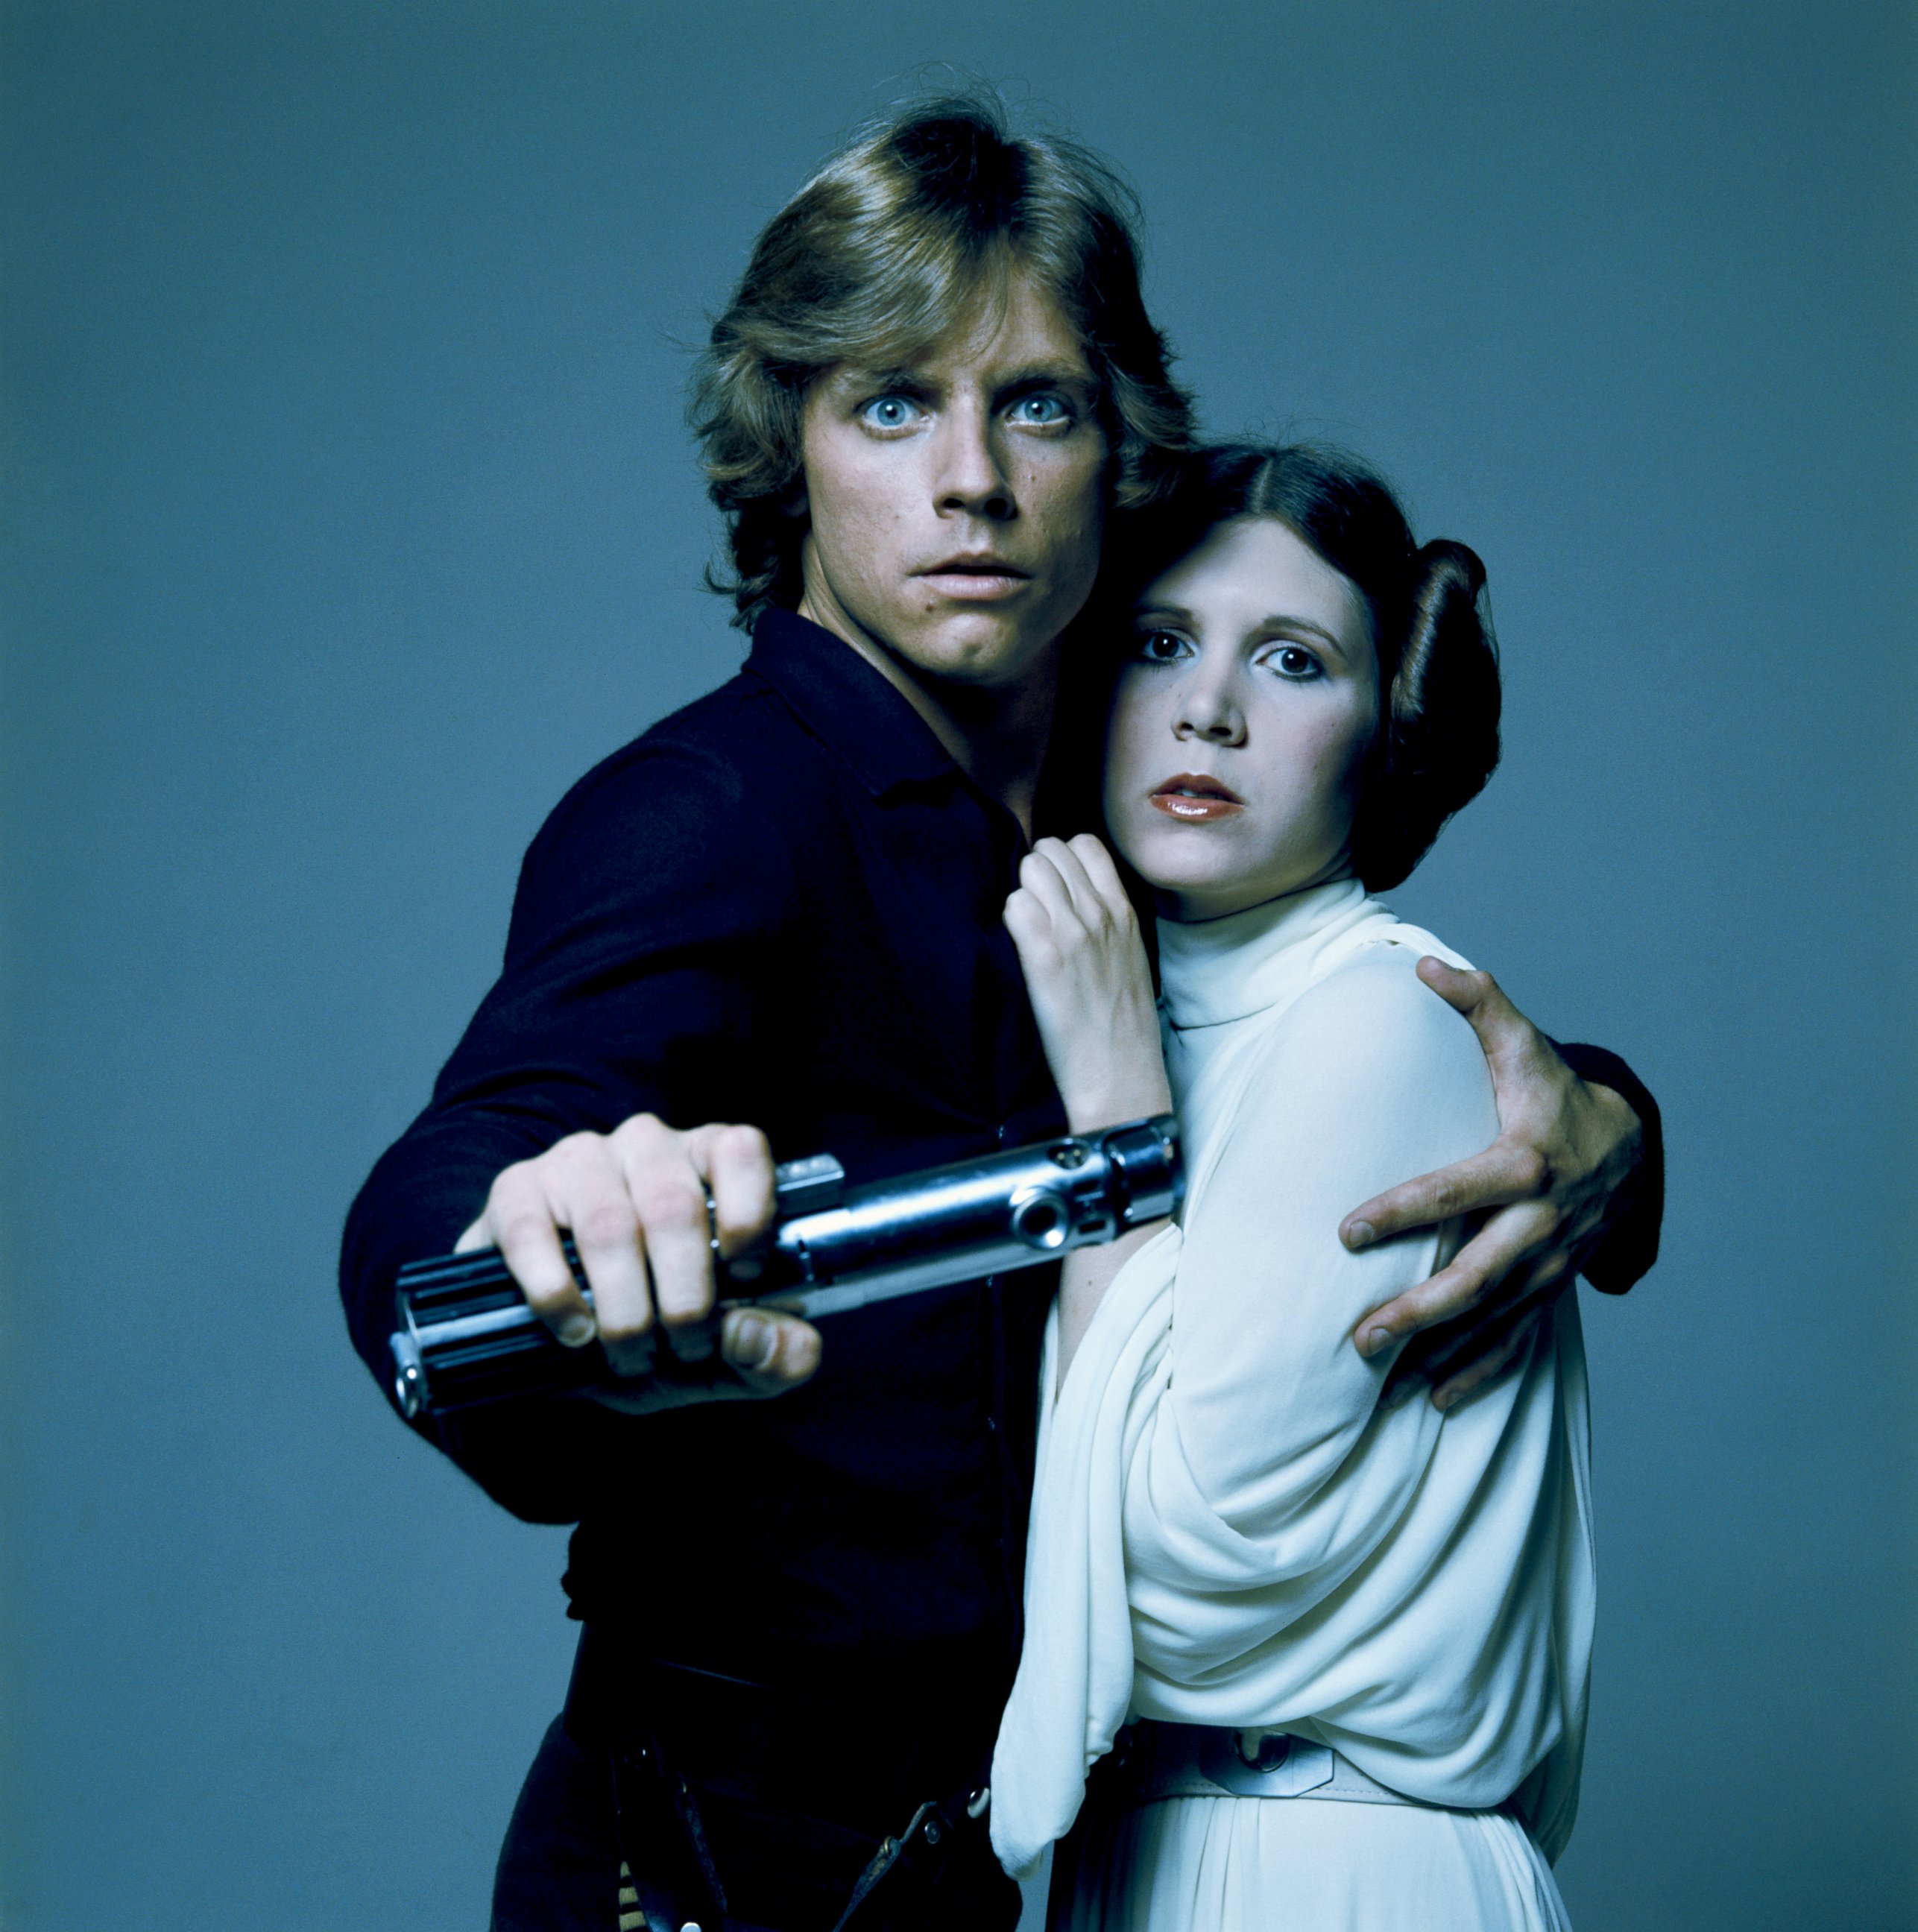 PHOTO: American actors Mark Hamill and Carrie Fisher in costume as brother and sister Luke Skywalker and Princess Leia in George Lucas' Star Wars trilogy in this 1977 file photo.